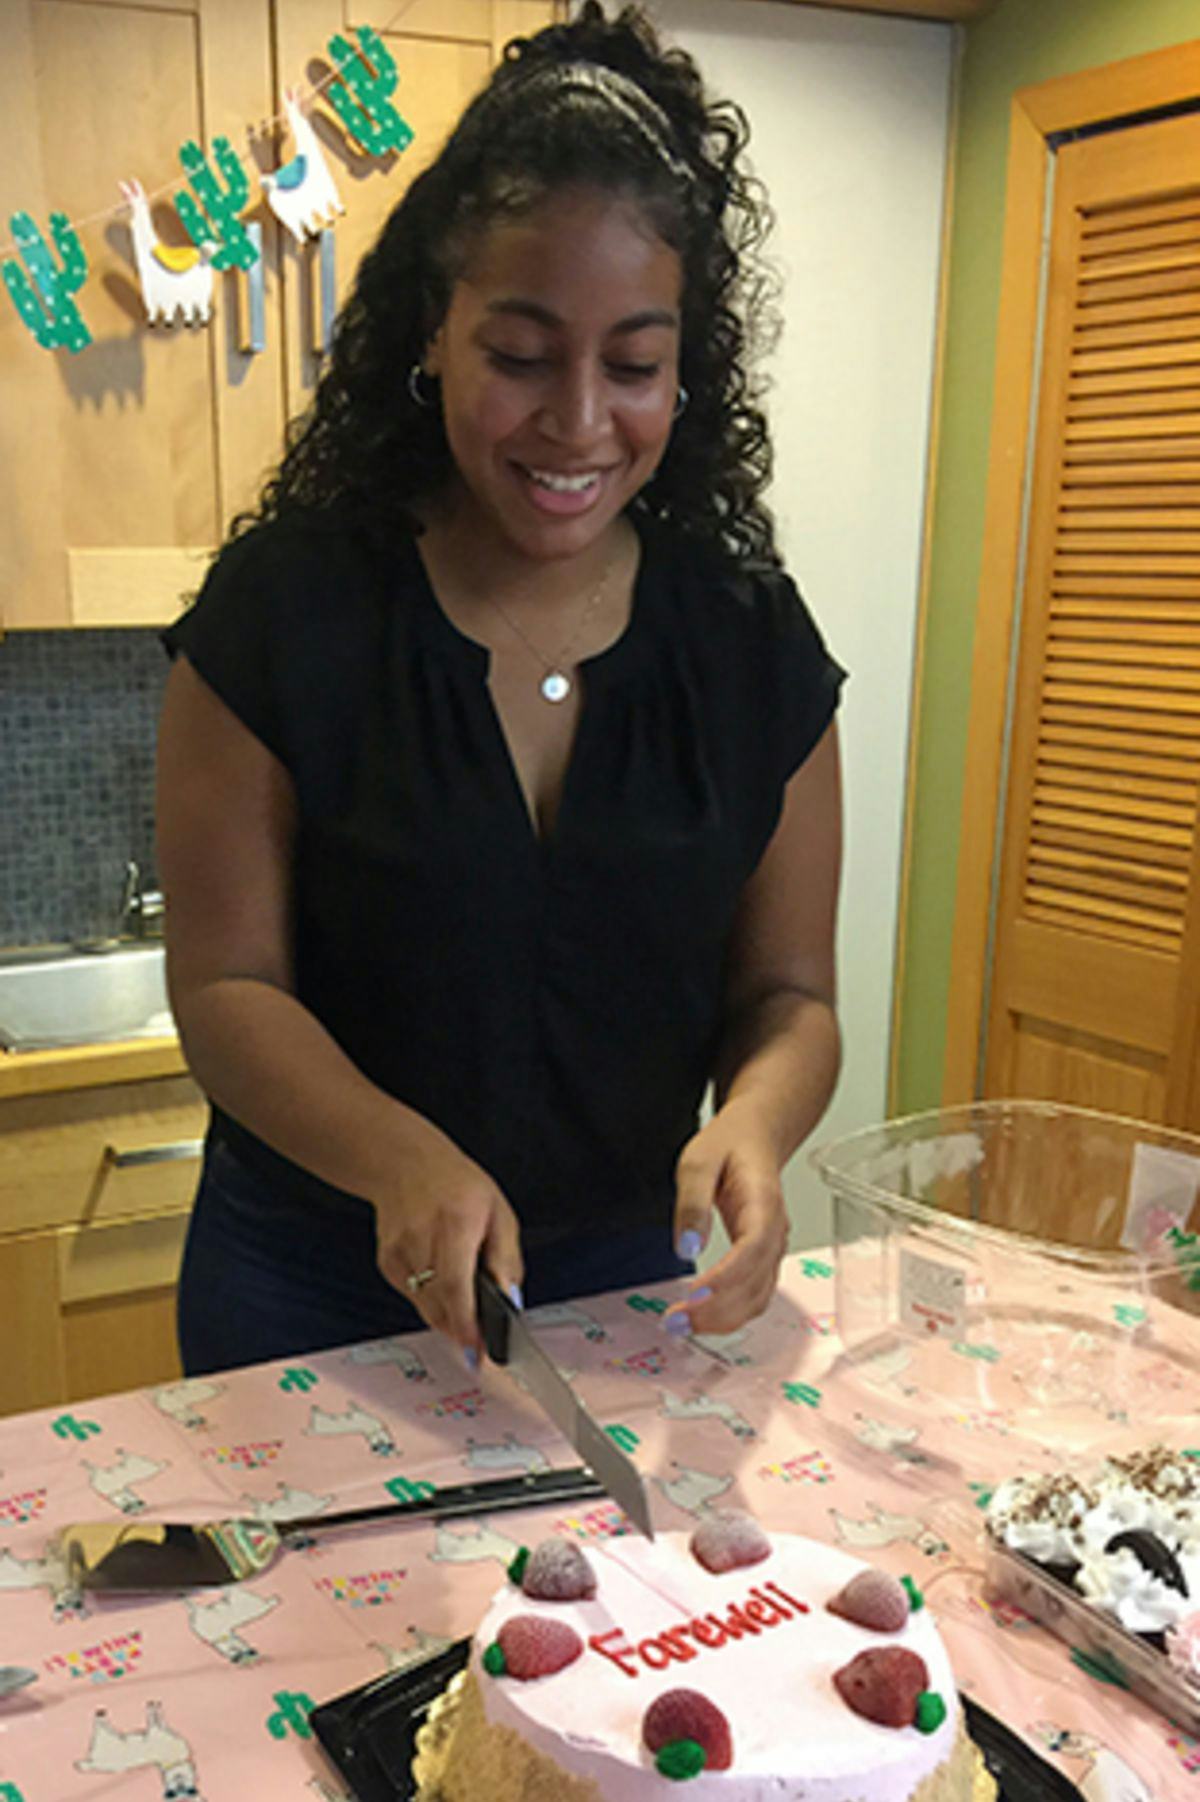 Andrea Gamboa cutting into a farewell cake at the end of her internship.;